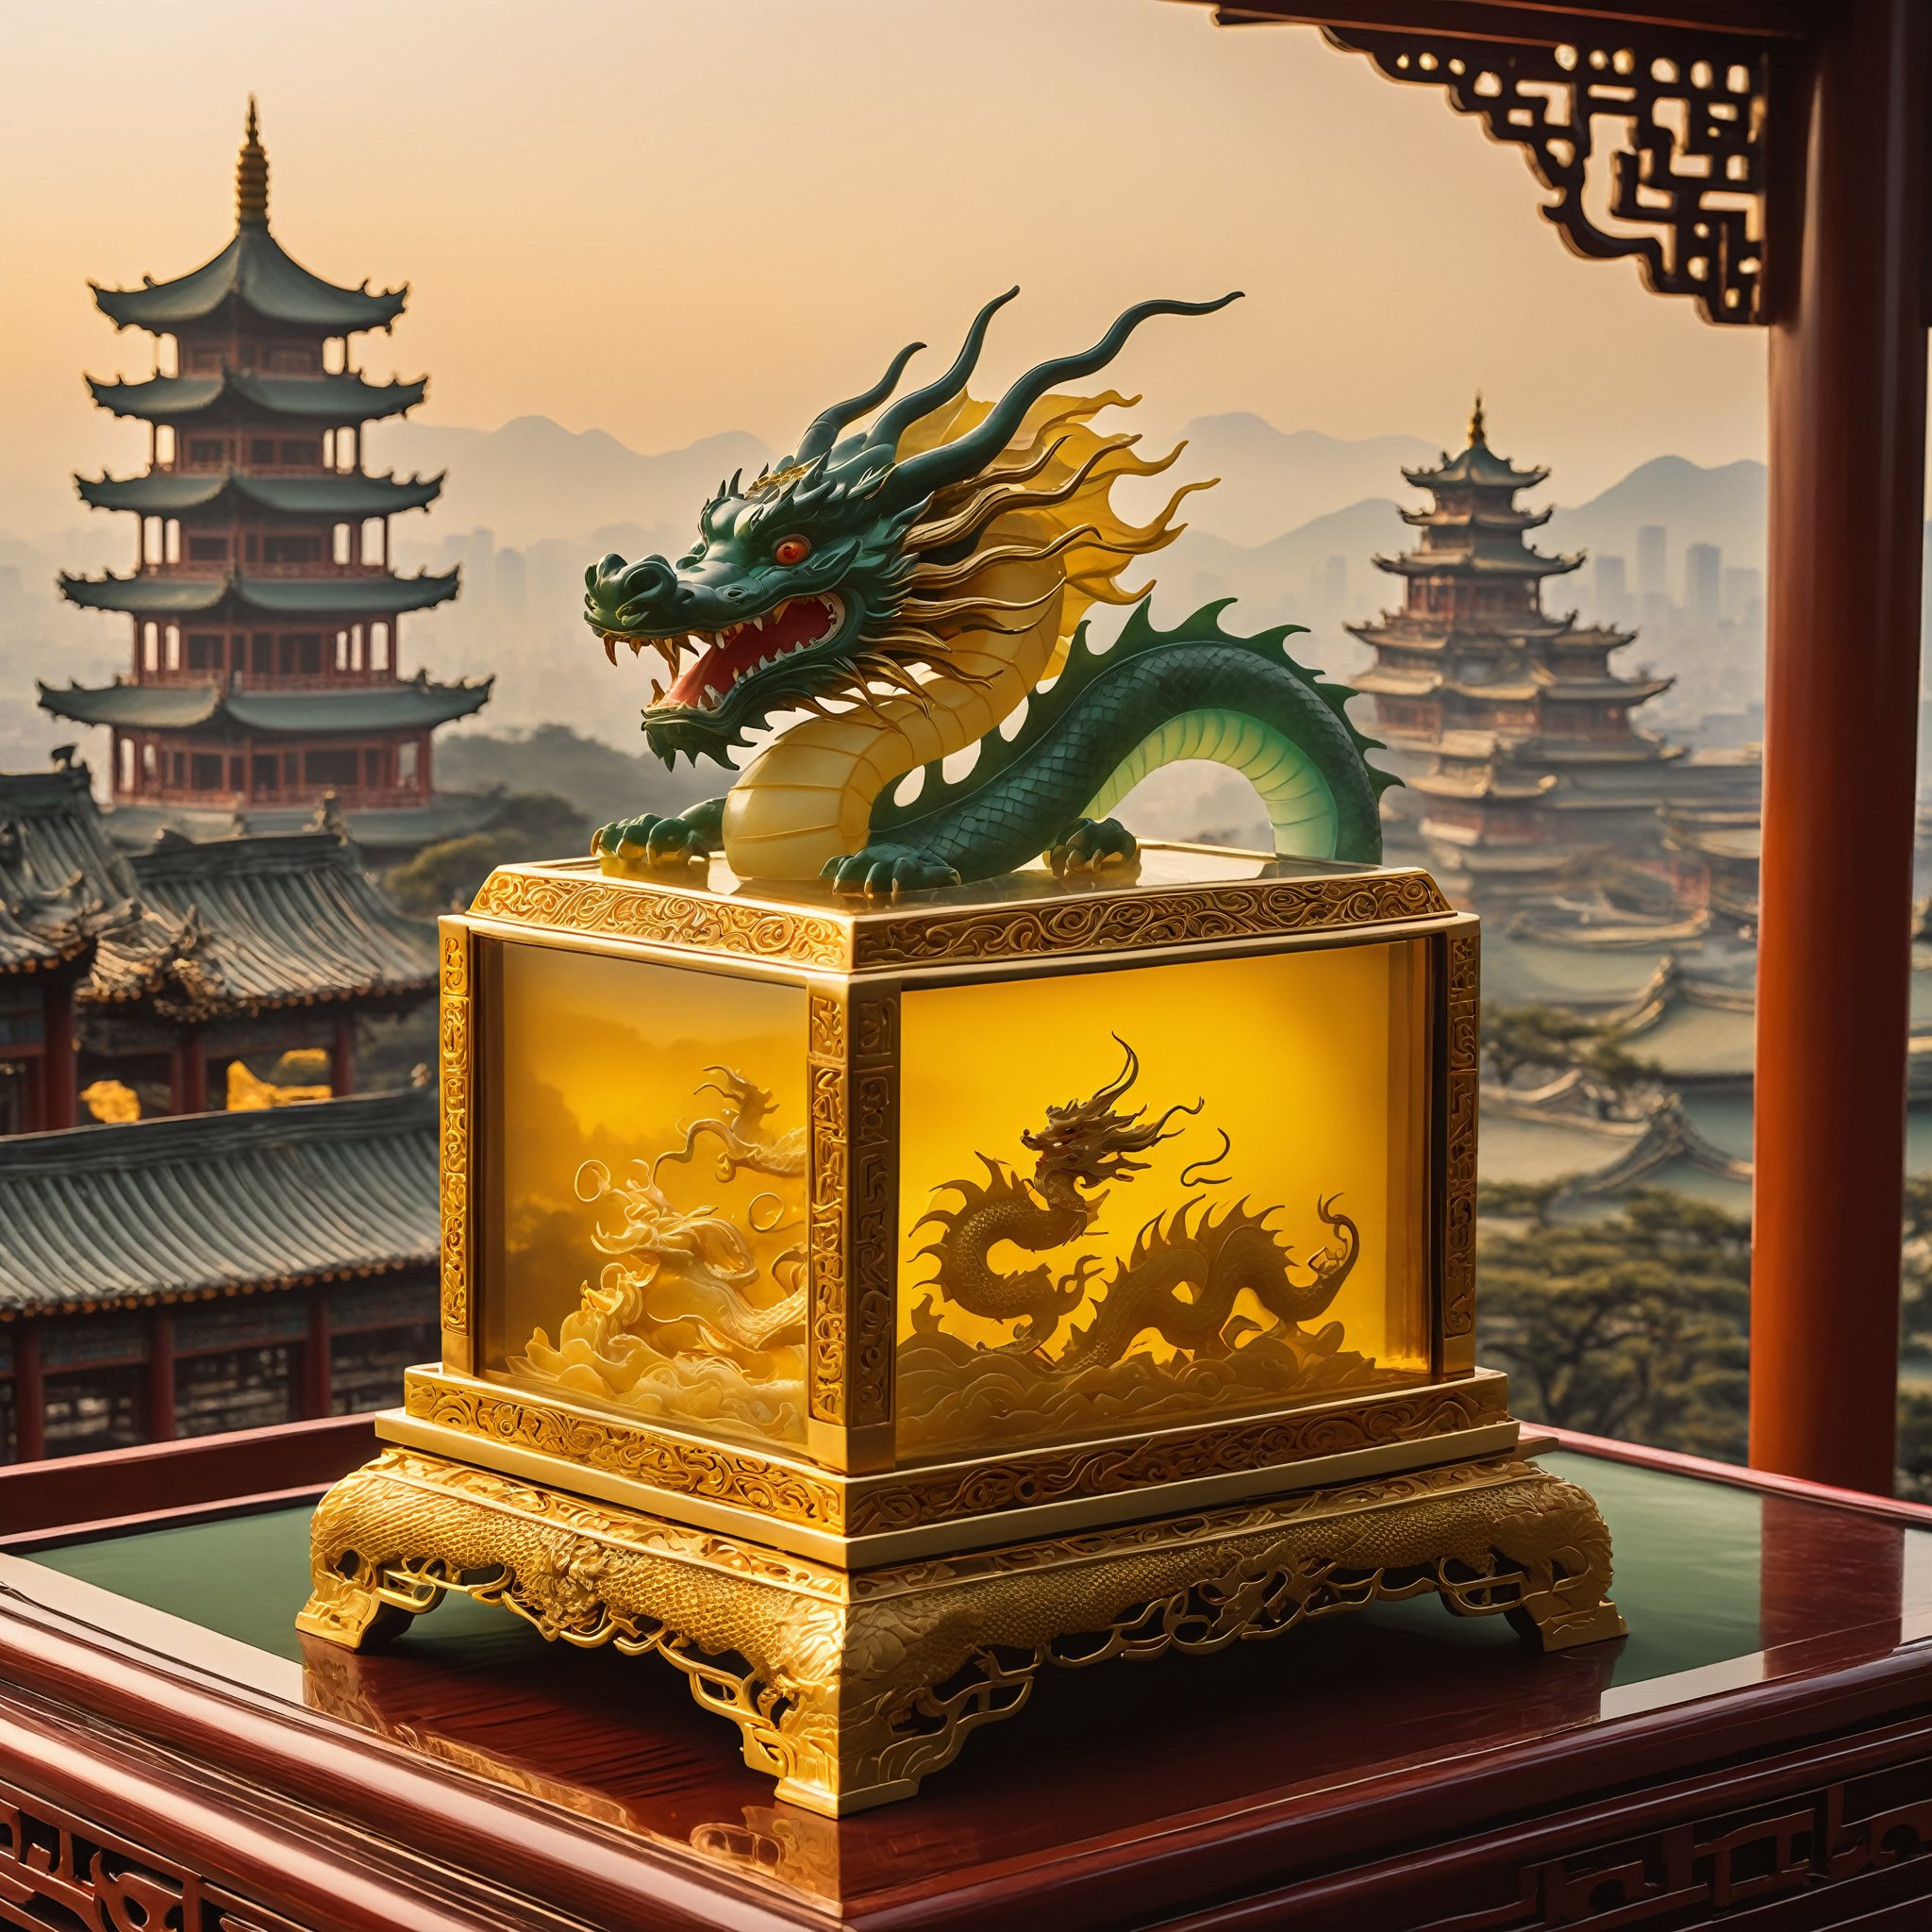 A majestic Yellow Jade Dragon rises from a velvet-lined jewel case, its scales glinting under soft, golden lighting. In the background, a blurred cityscape of ancient China's misty mountains and pagoda-topped rooftops. A delicate, ornate frame surrounds the dragon, adorned with intricate carvings of Chinese symbols. The atmosphere is one of mystique and otherworldly power.